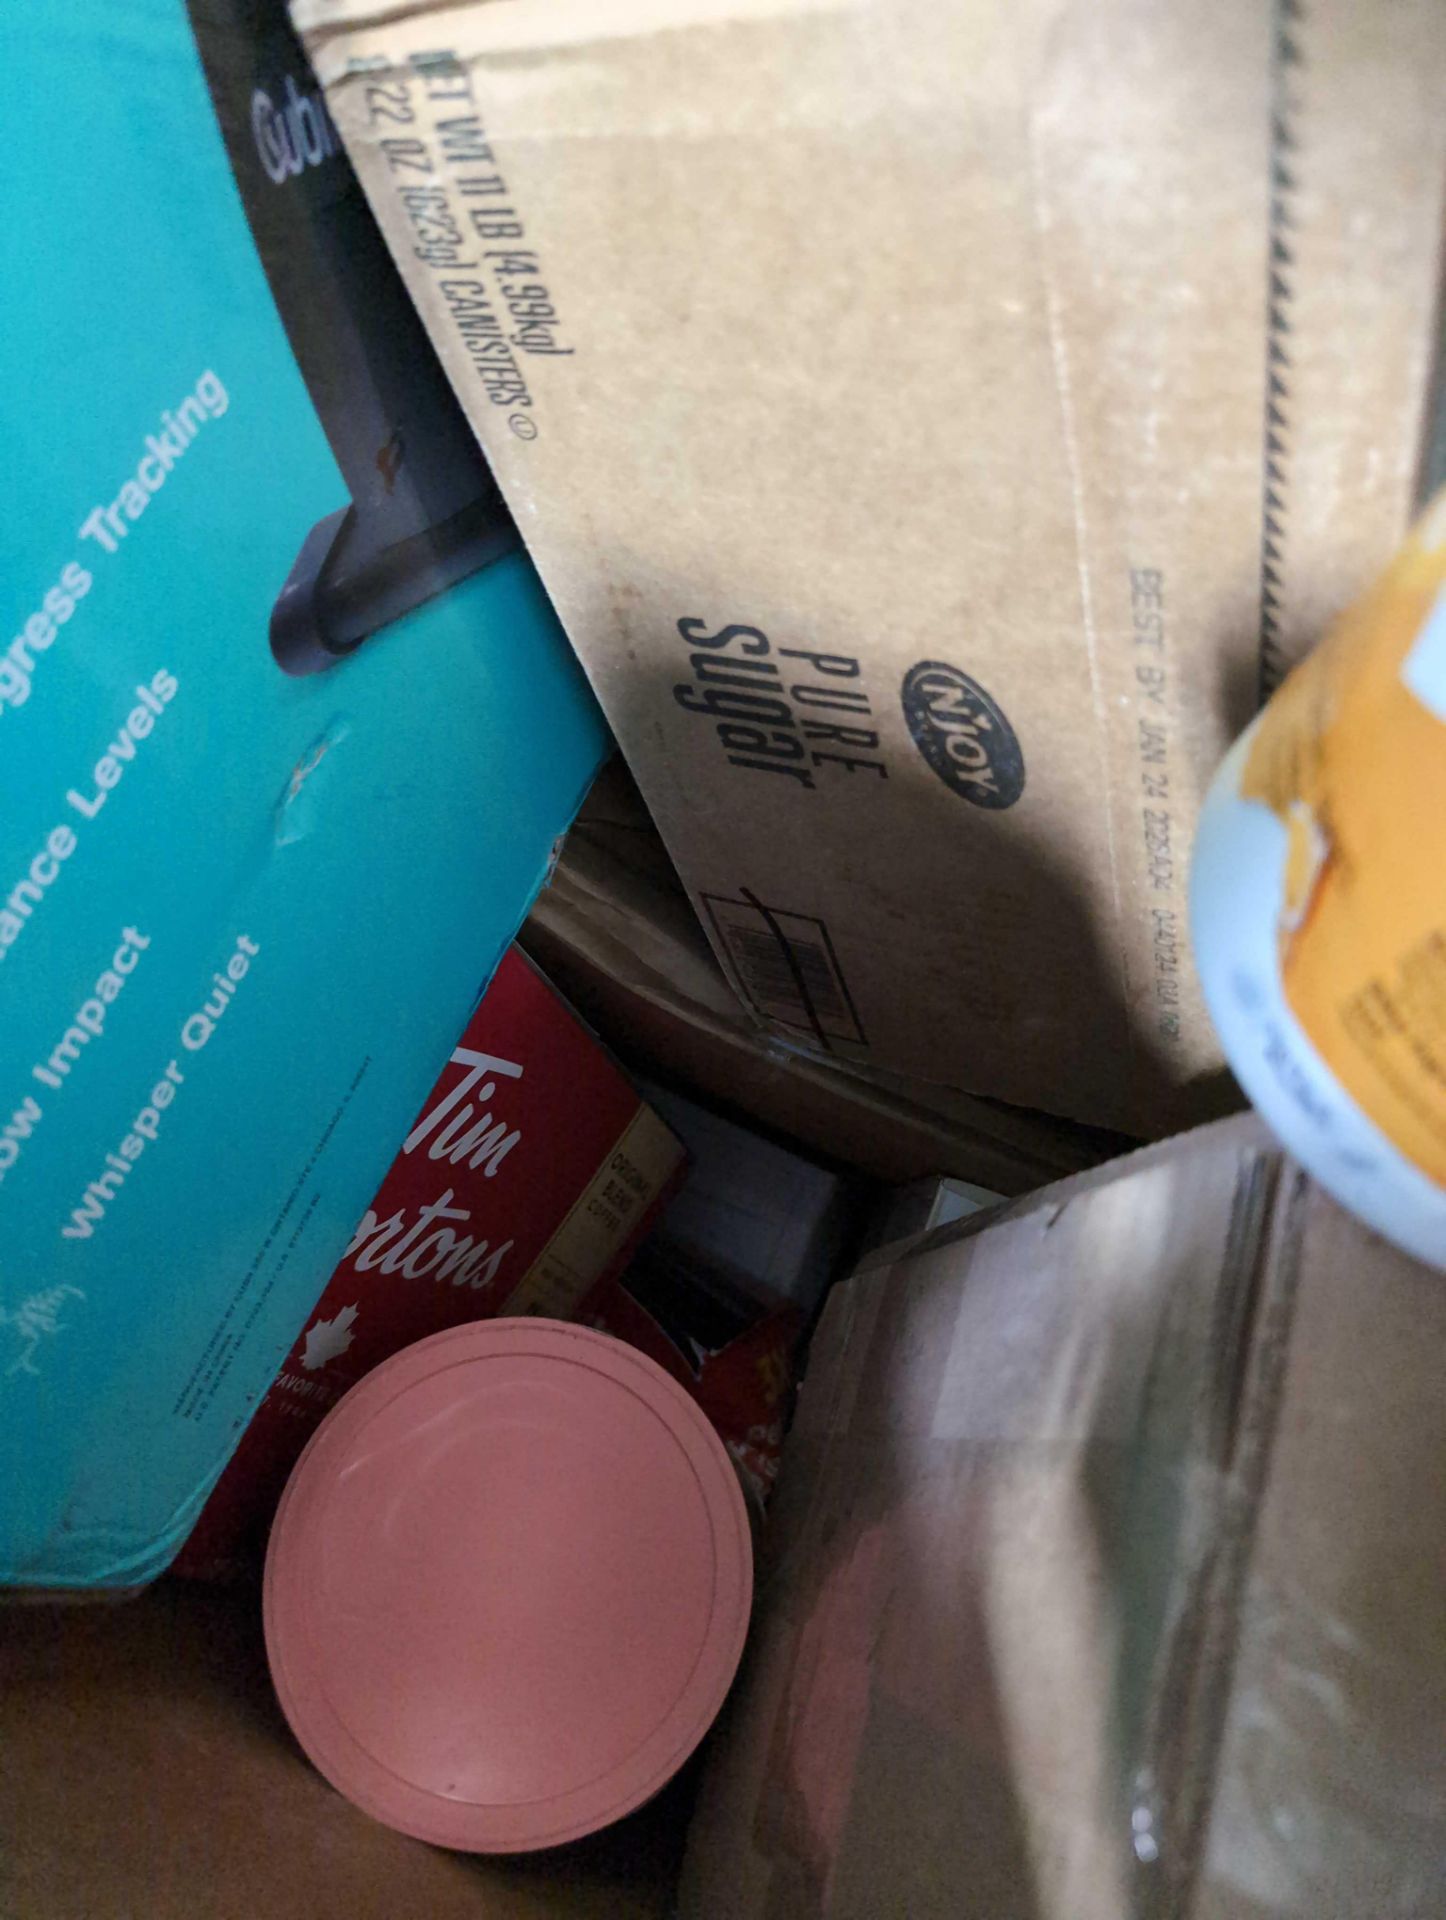 Big box store in a box: Canned chicke, Paper towels, baket chips, ketchup, trash liners, Cubii seate - Image 14 of 14